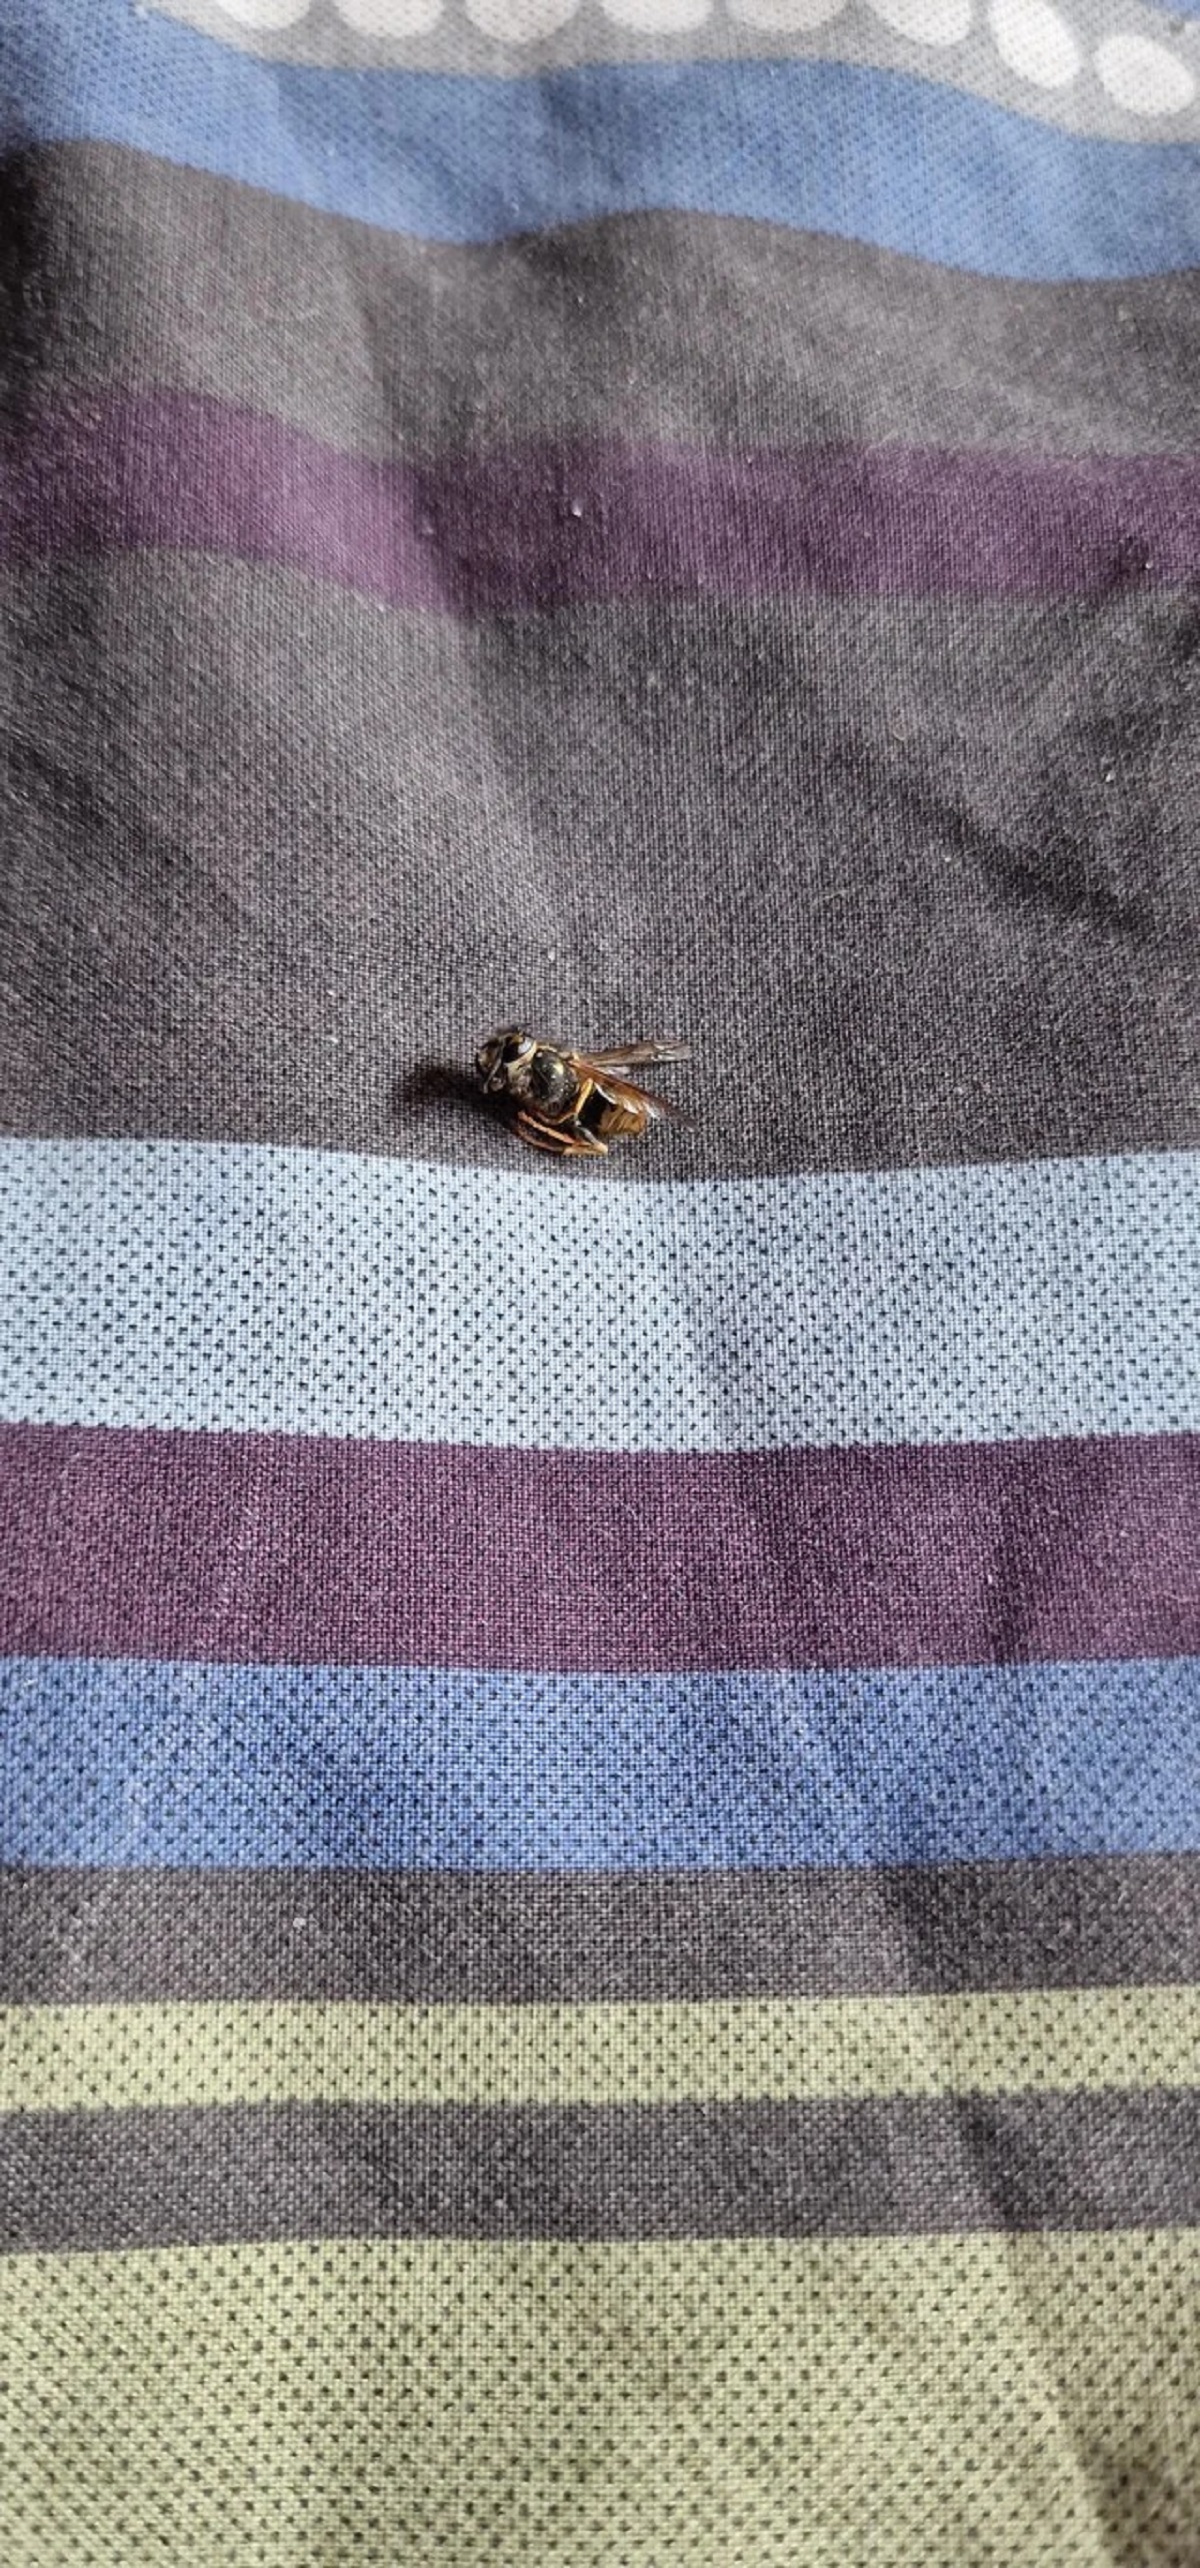 This little guy's sting was my alarm clock today